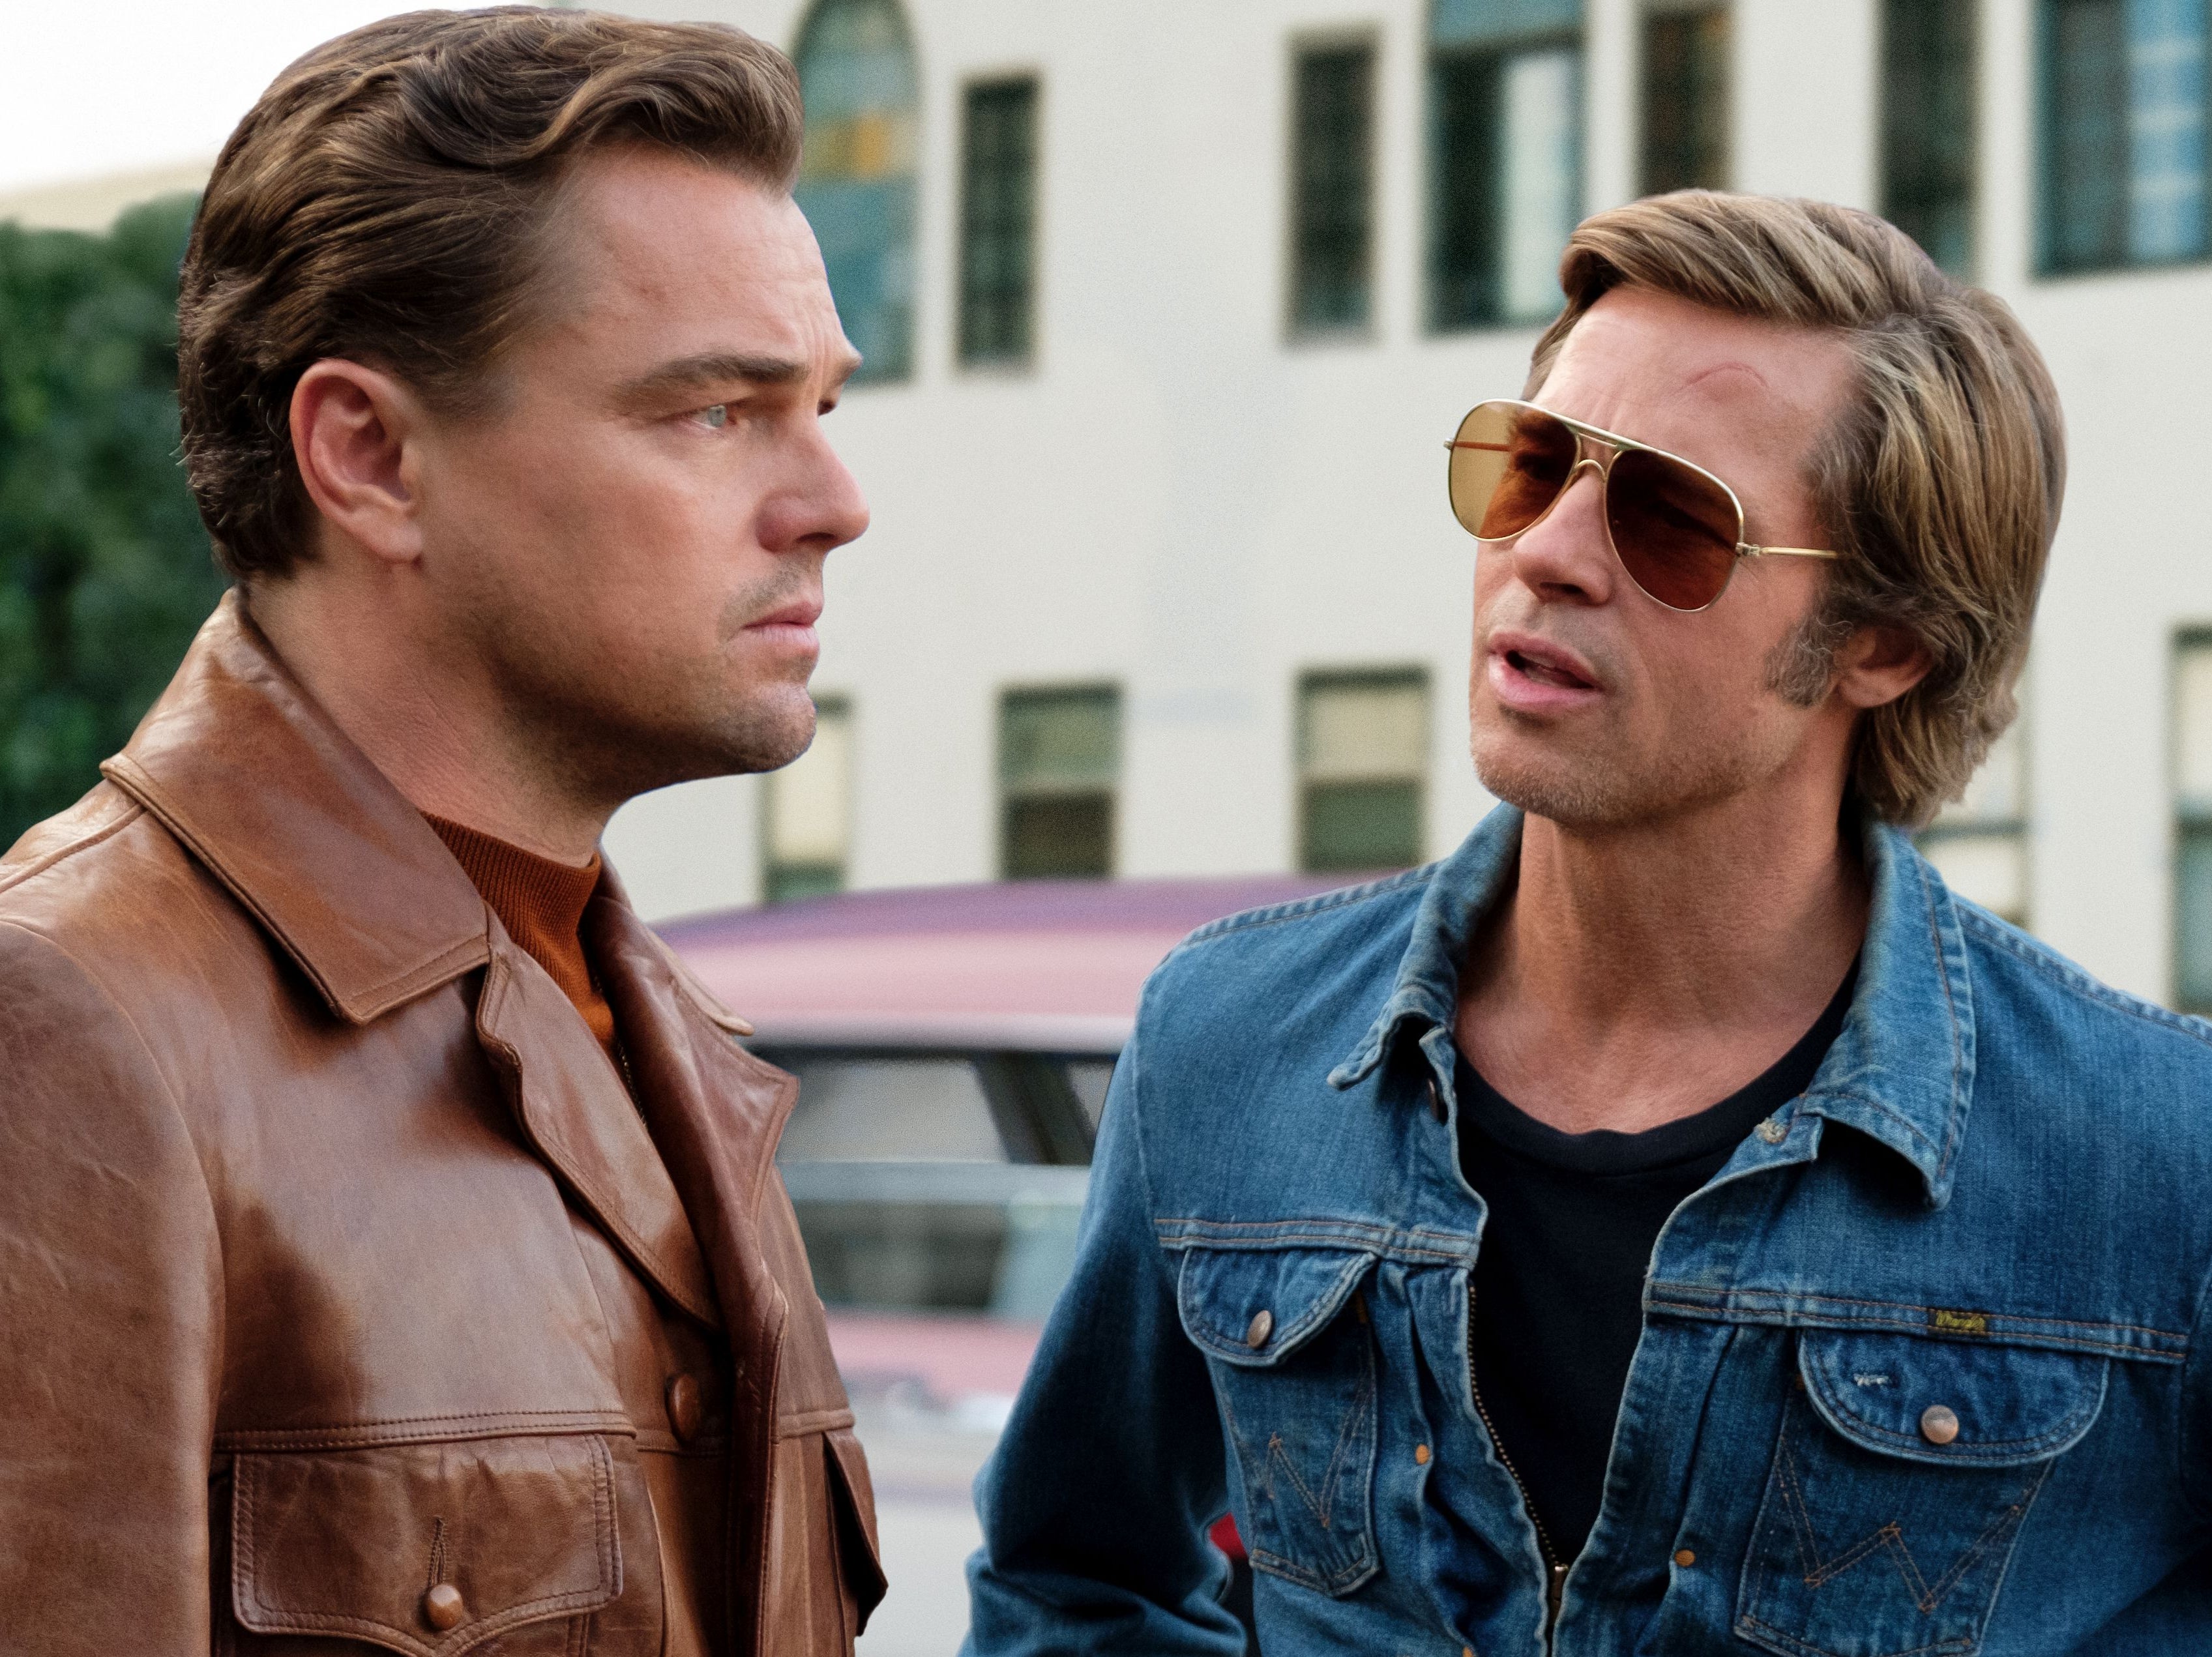 Leonardo DiCaprio and Brad Pitt in ‘Once Upon a Time... In Hollywood'